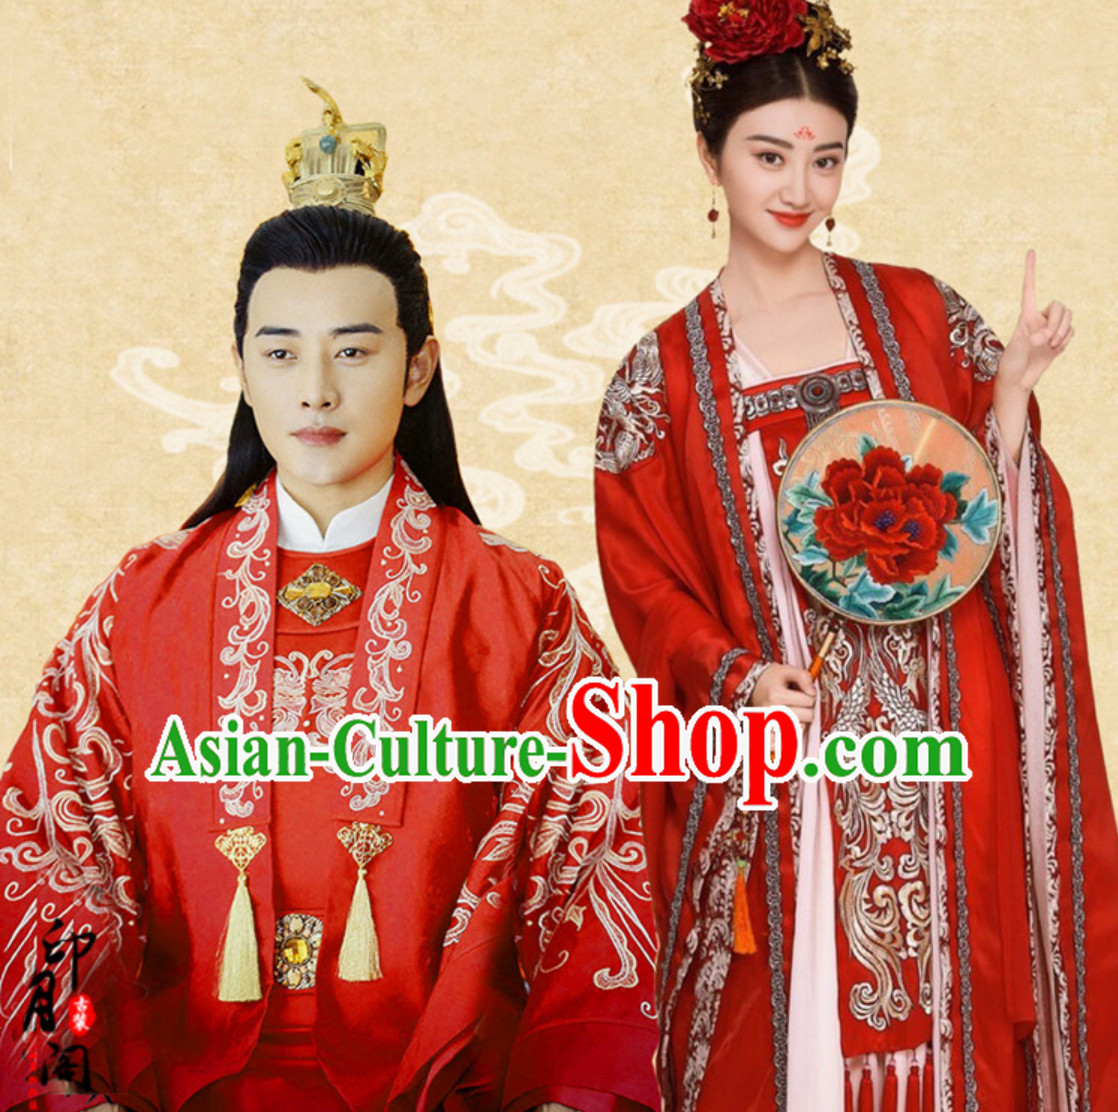 Tang Dynasty Imperial Wedding Dress for Bridegroom